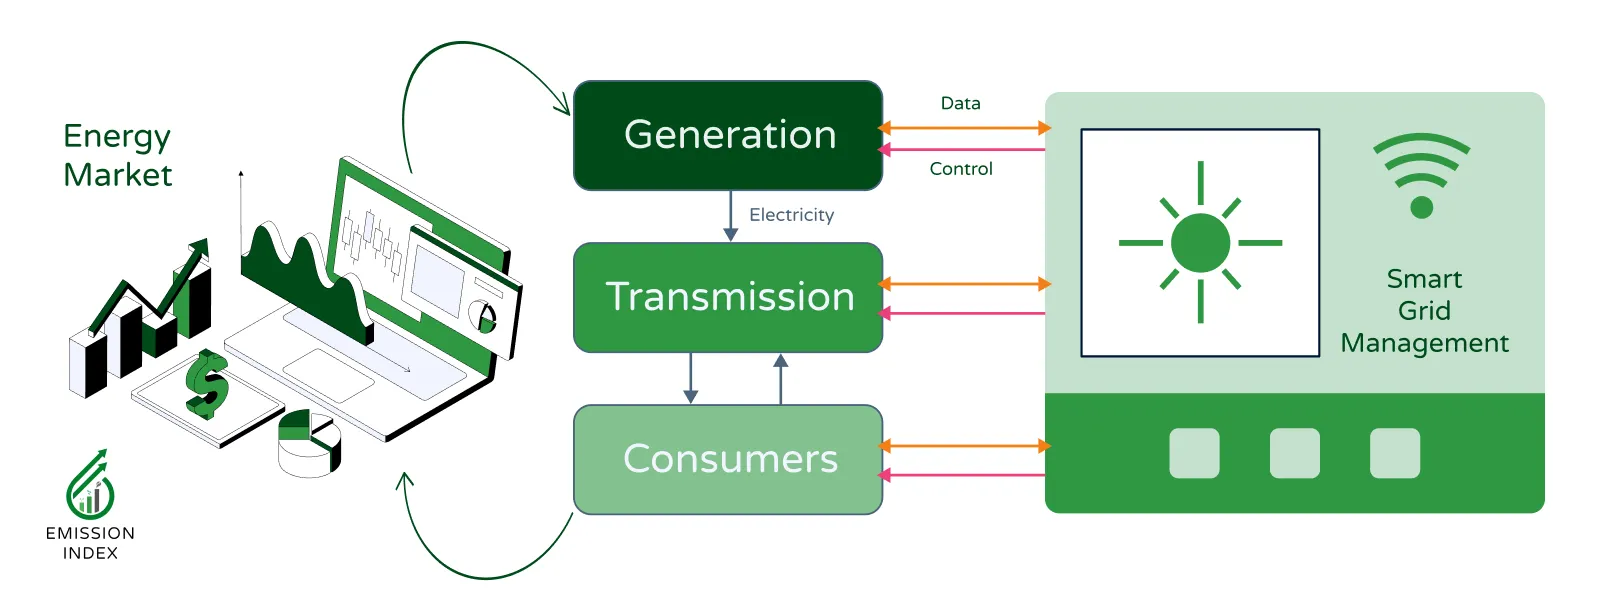 Diagram showing the flow of information in an AI smart grid